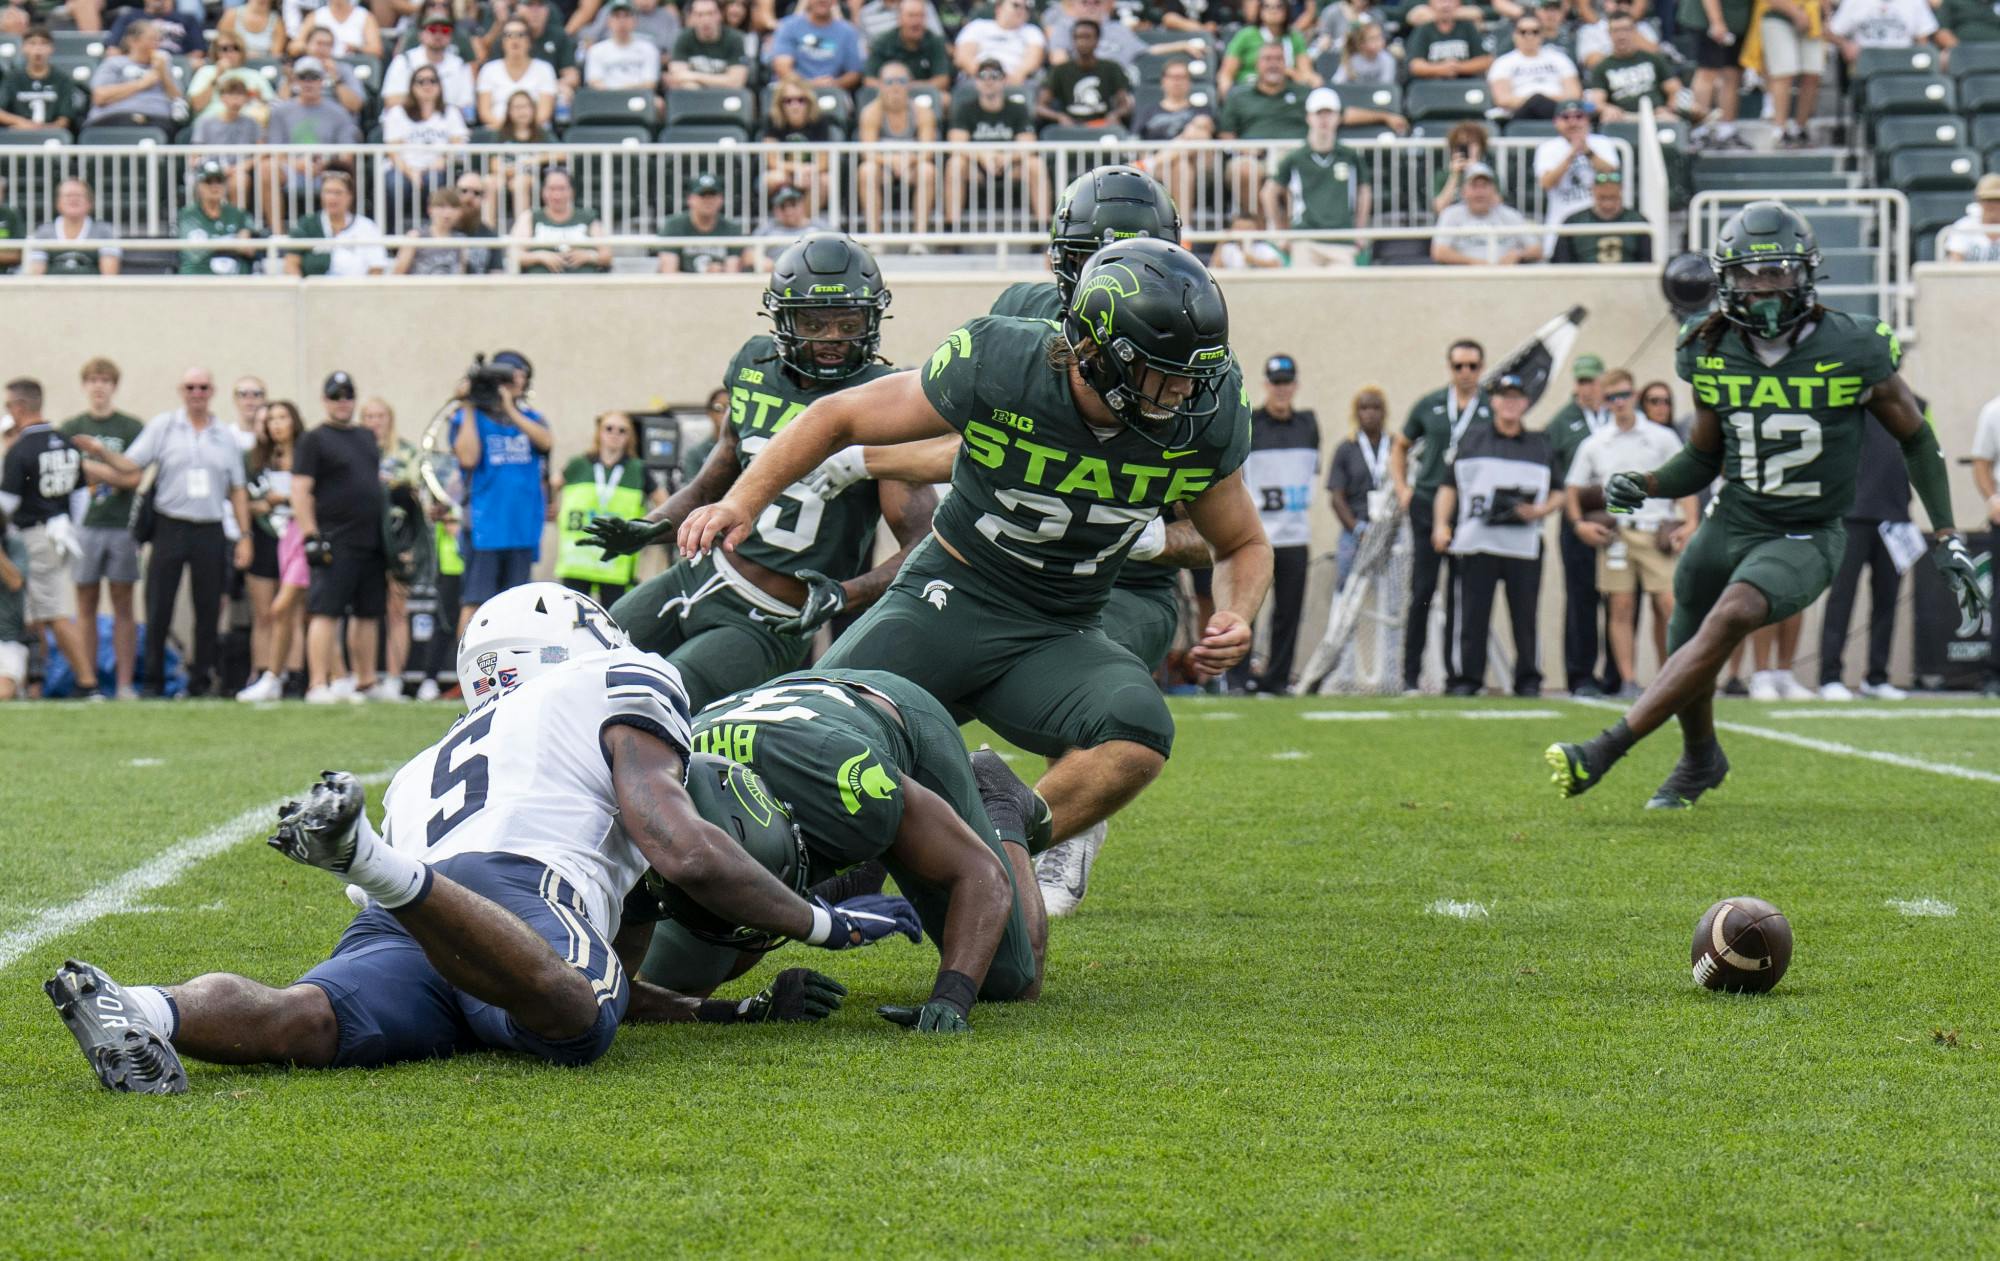 Redshirt sophomore linebacker Cal Haladay, 27, turns to pick up the Akron fumble during Michigan State’s game against the Zips on Sat., Sept. 10, 2022 at Spartan Stadium.